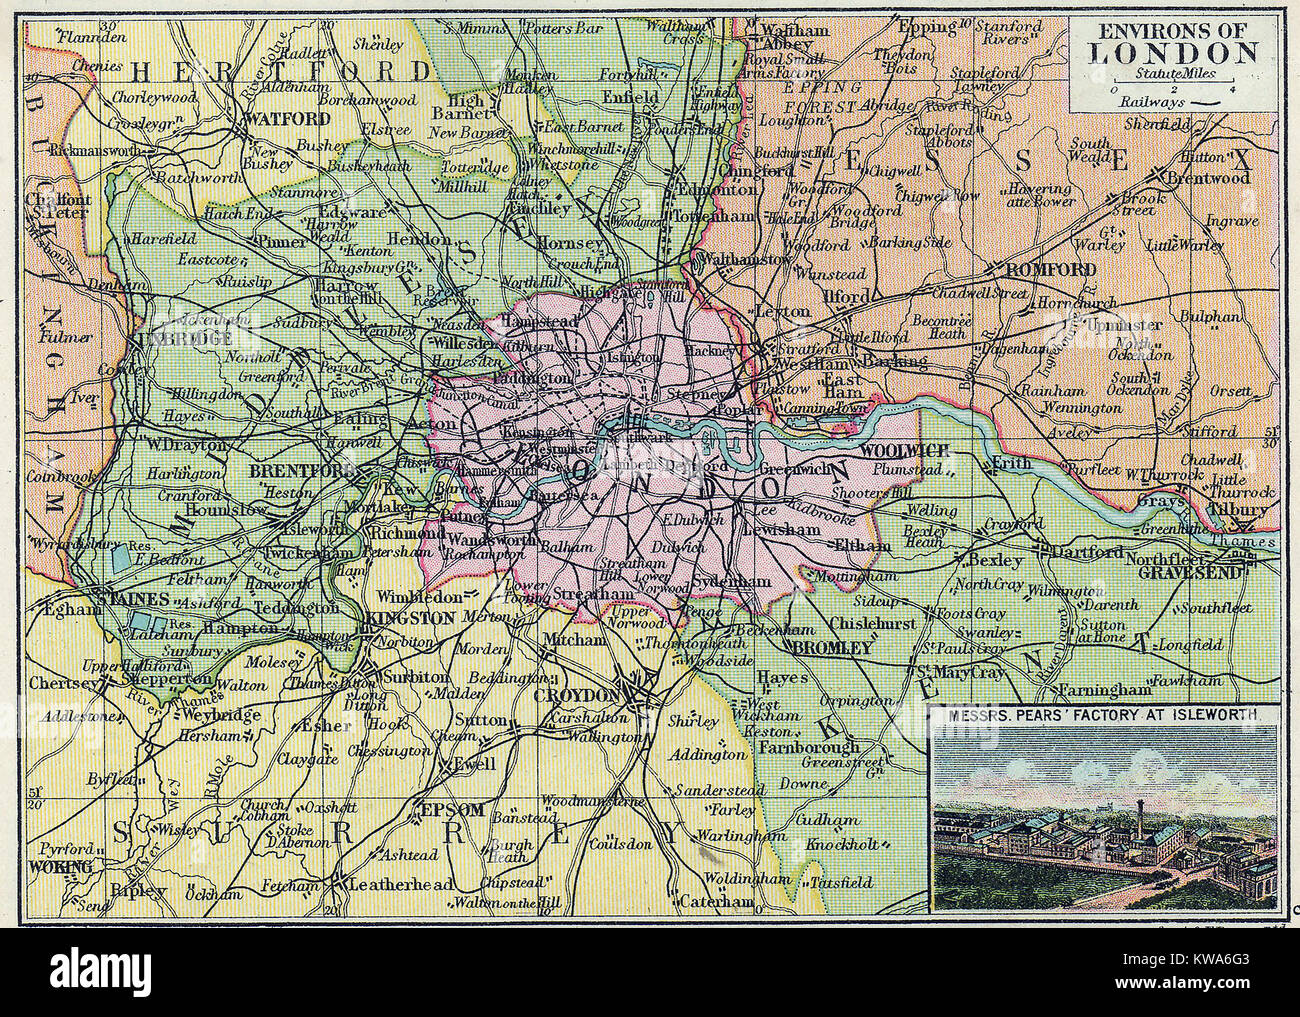 A  coloured map of London, environs and surrounding towns and villages   in 1923 with an advert for Pear Soap showing their factory at Islington and the main railway lines and roads. Stock Photo